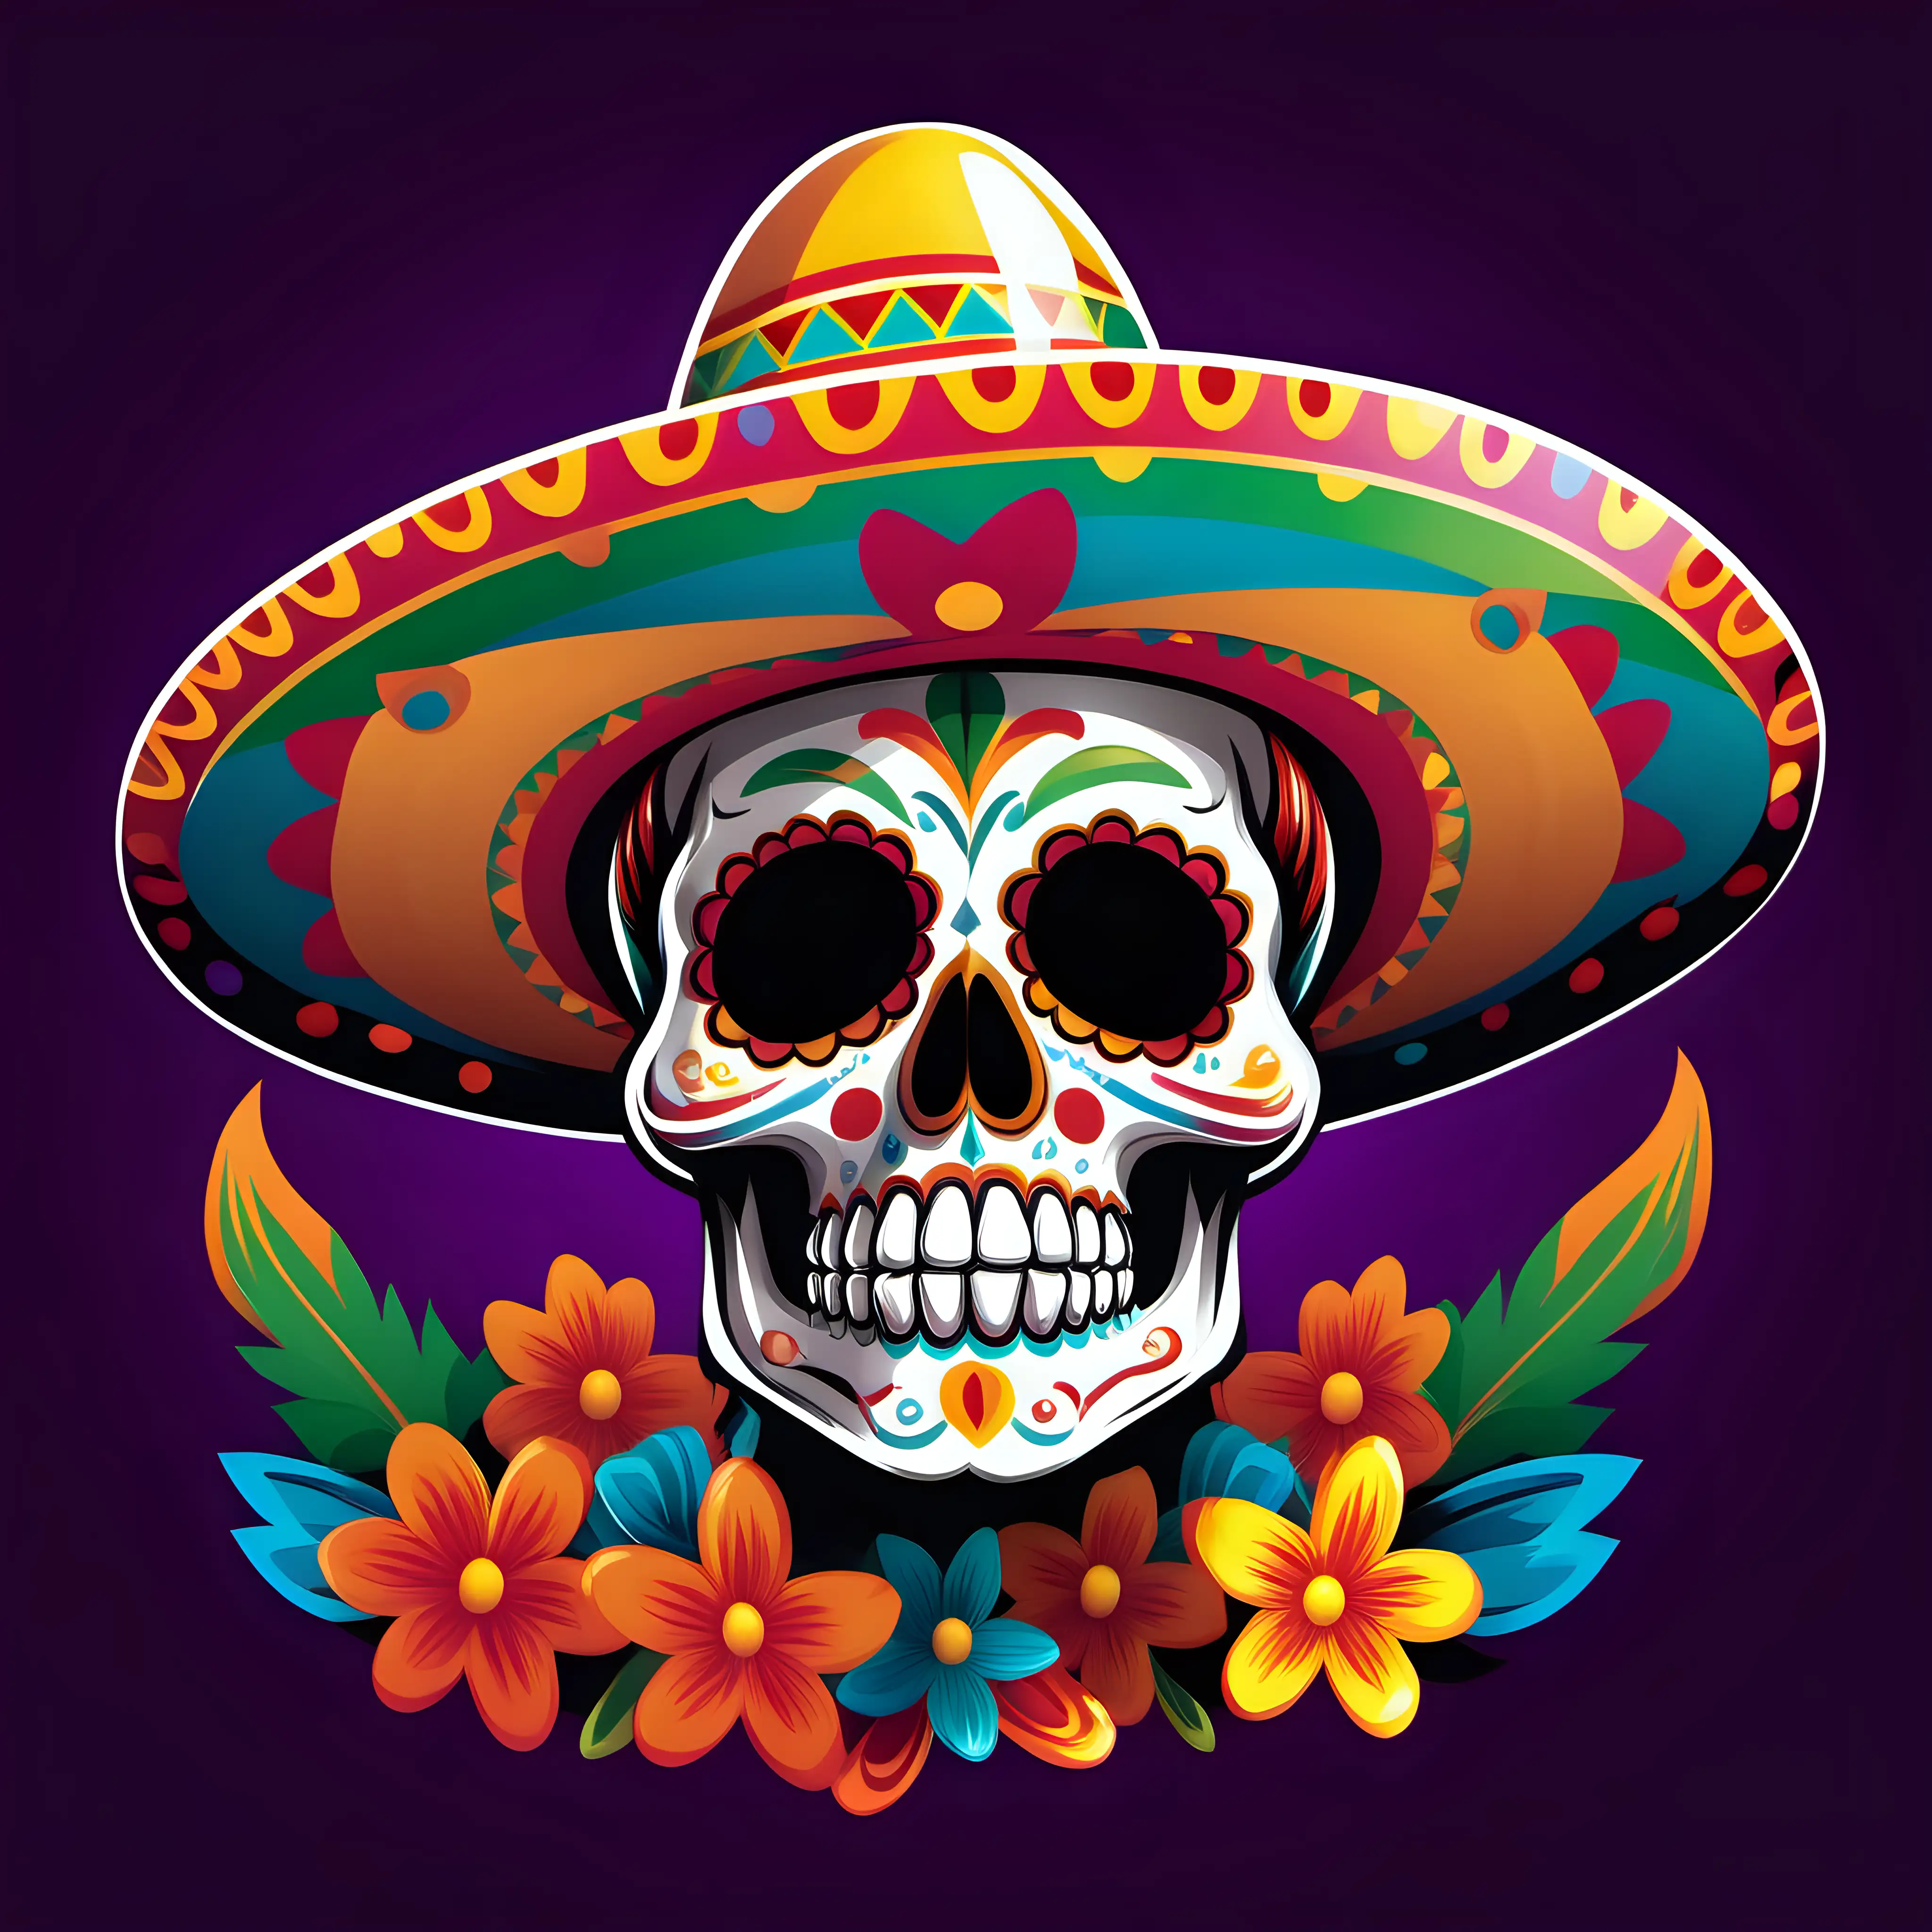 Image of a cinco de Mayo style skull, colorful, no text